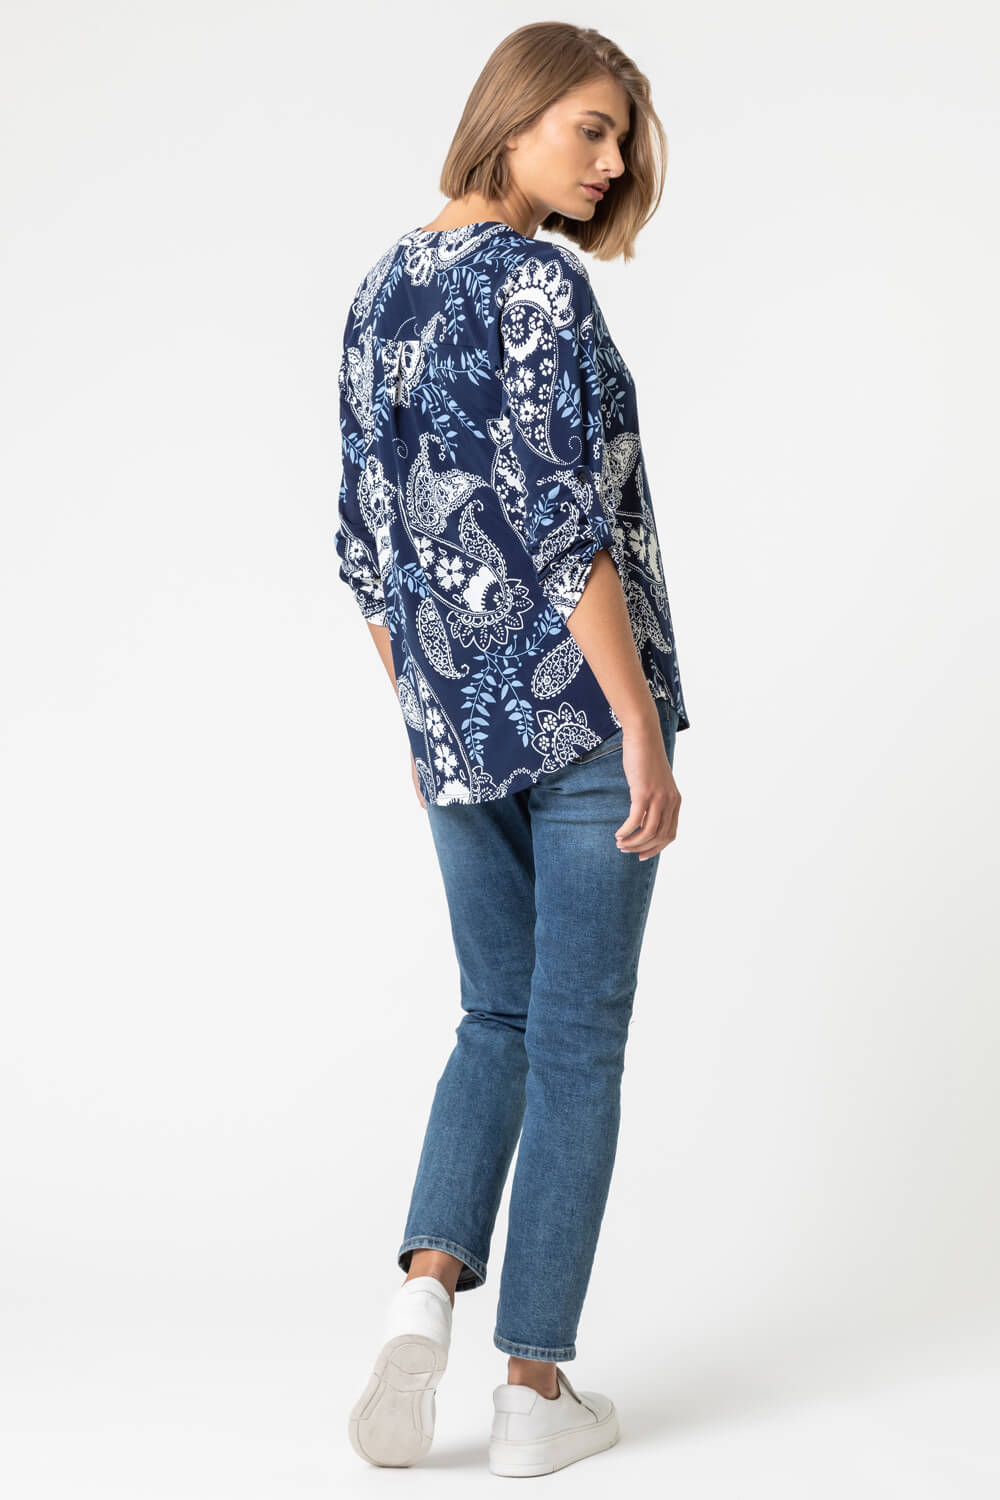 Blue Paisley Puff Print Notch Neck Top, Image 2 of 4